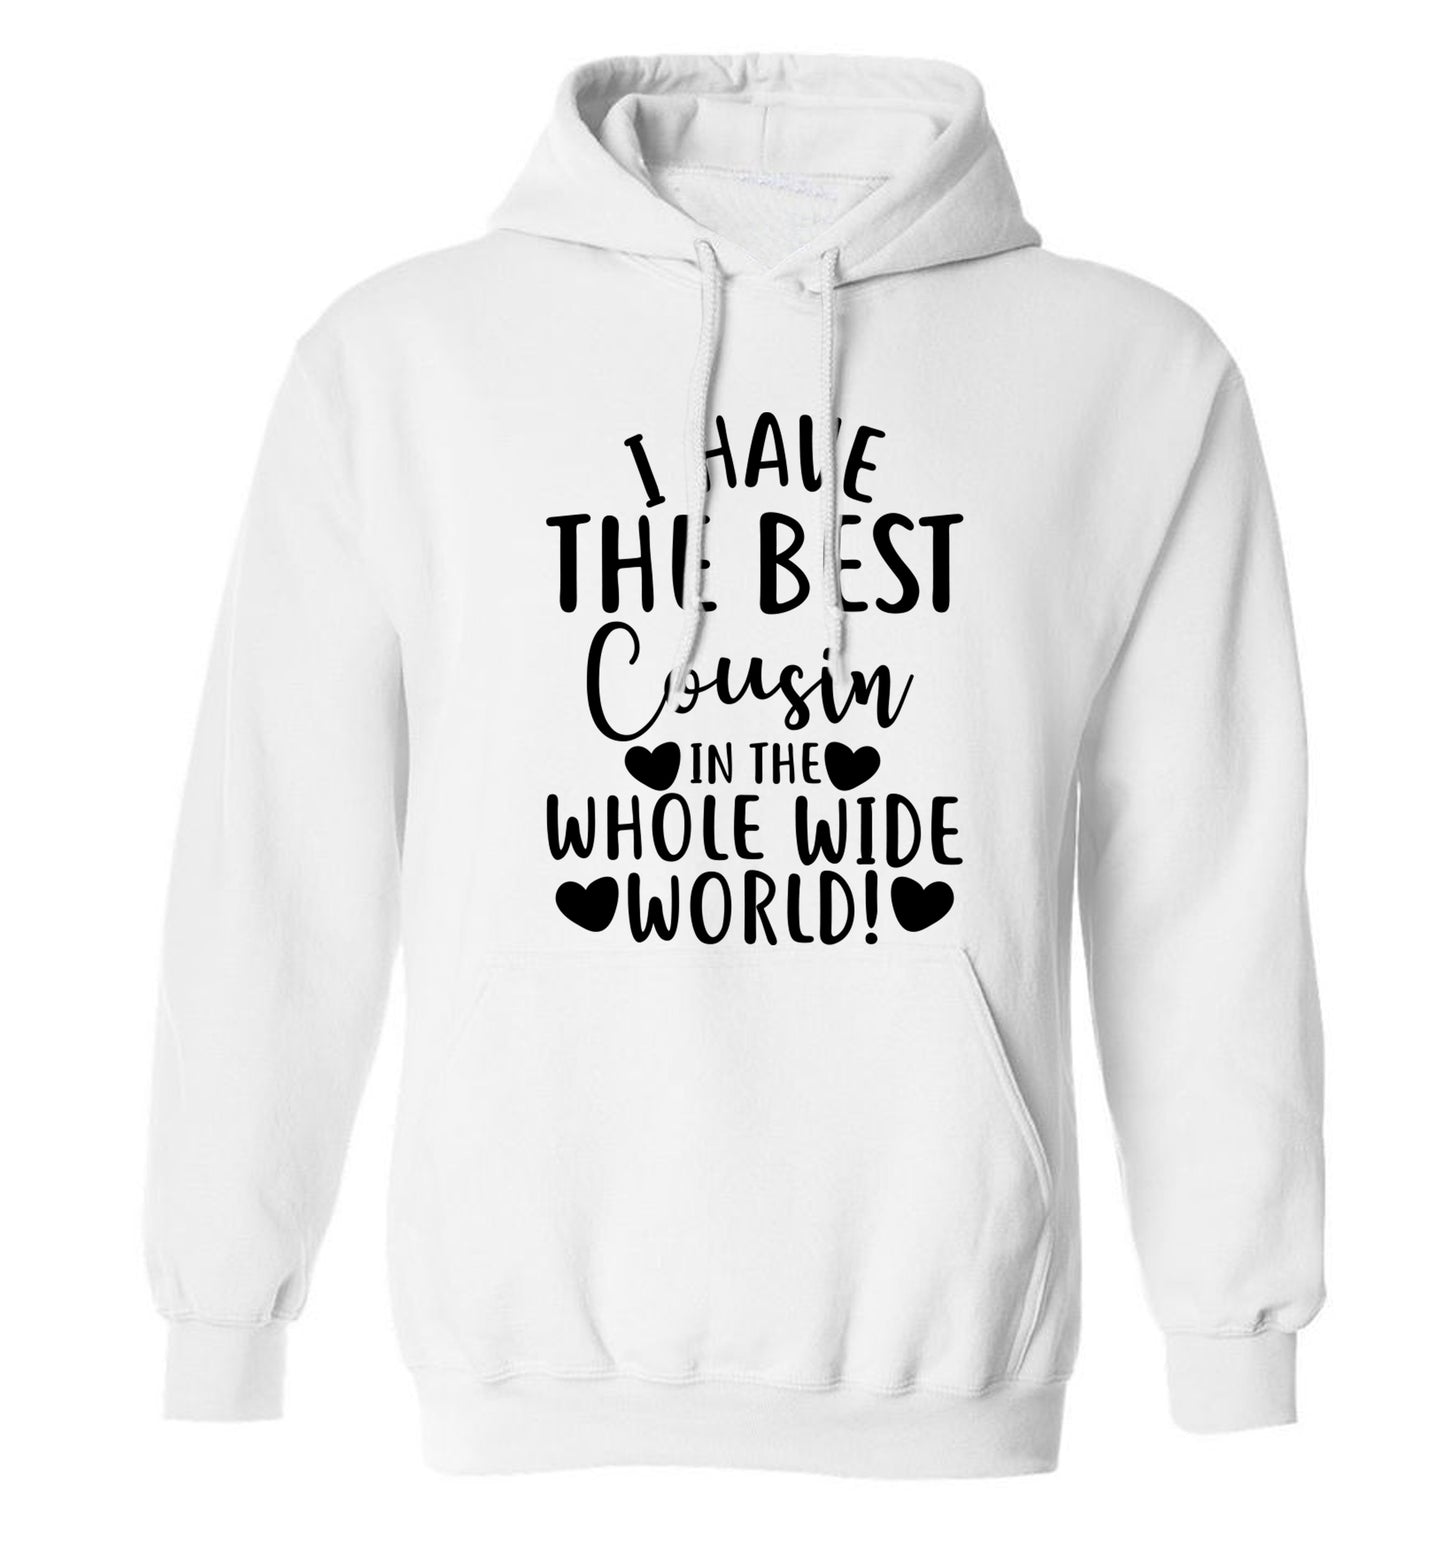 I have the best cousin in the whole wide world! adults unisex white hoodie 2XL